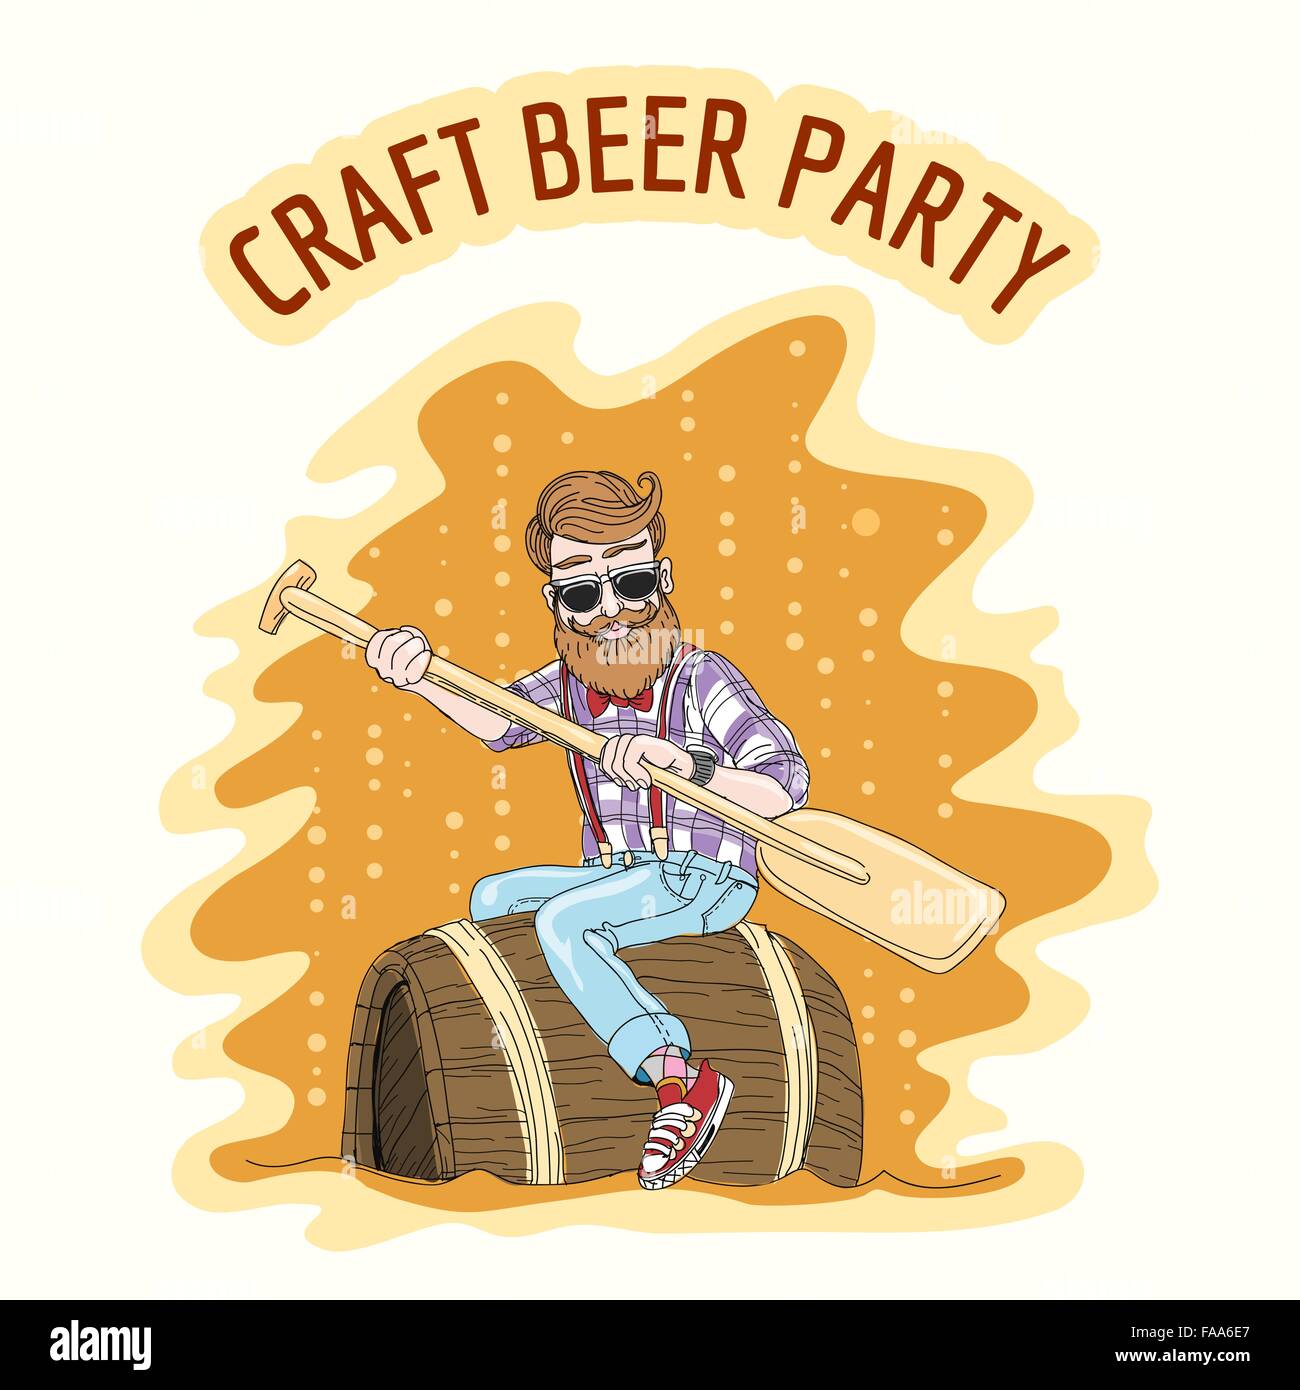 Craft Beer party Emblem. Hipster with an oar floats on a beer barrel. Free font used Stock Vector